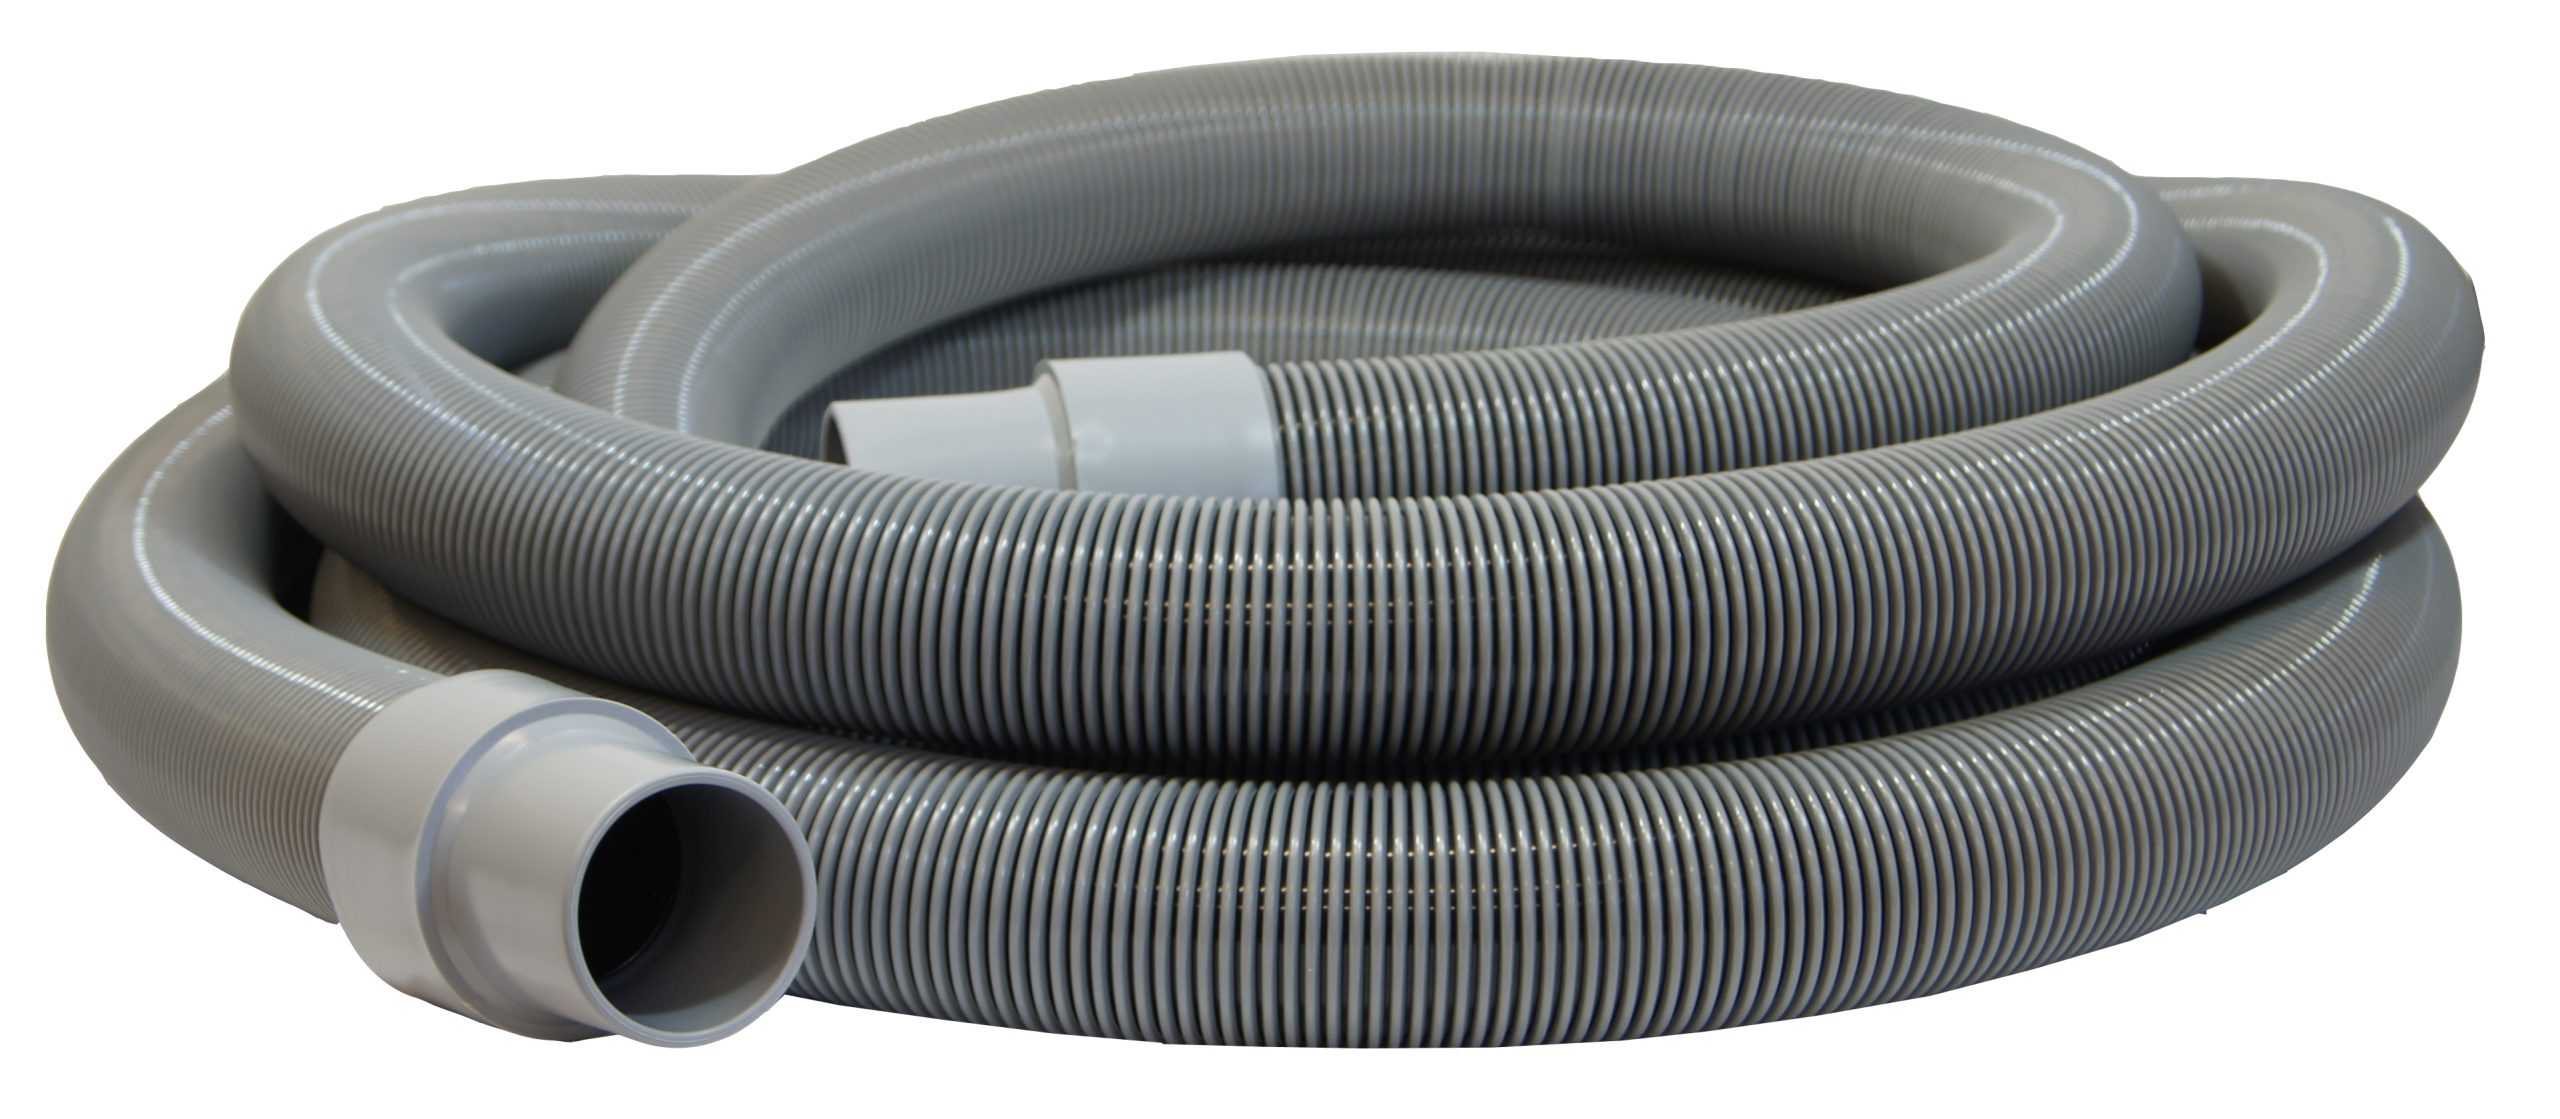 2.5 x 25' Cam & Groove Vacuum Hose: Dust collectors, Contractor System